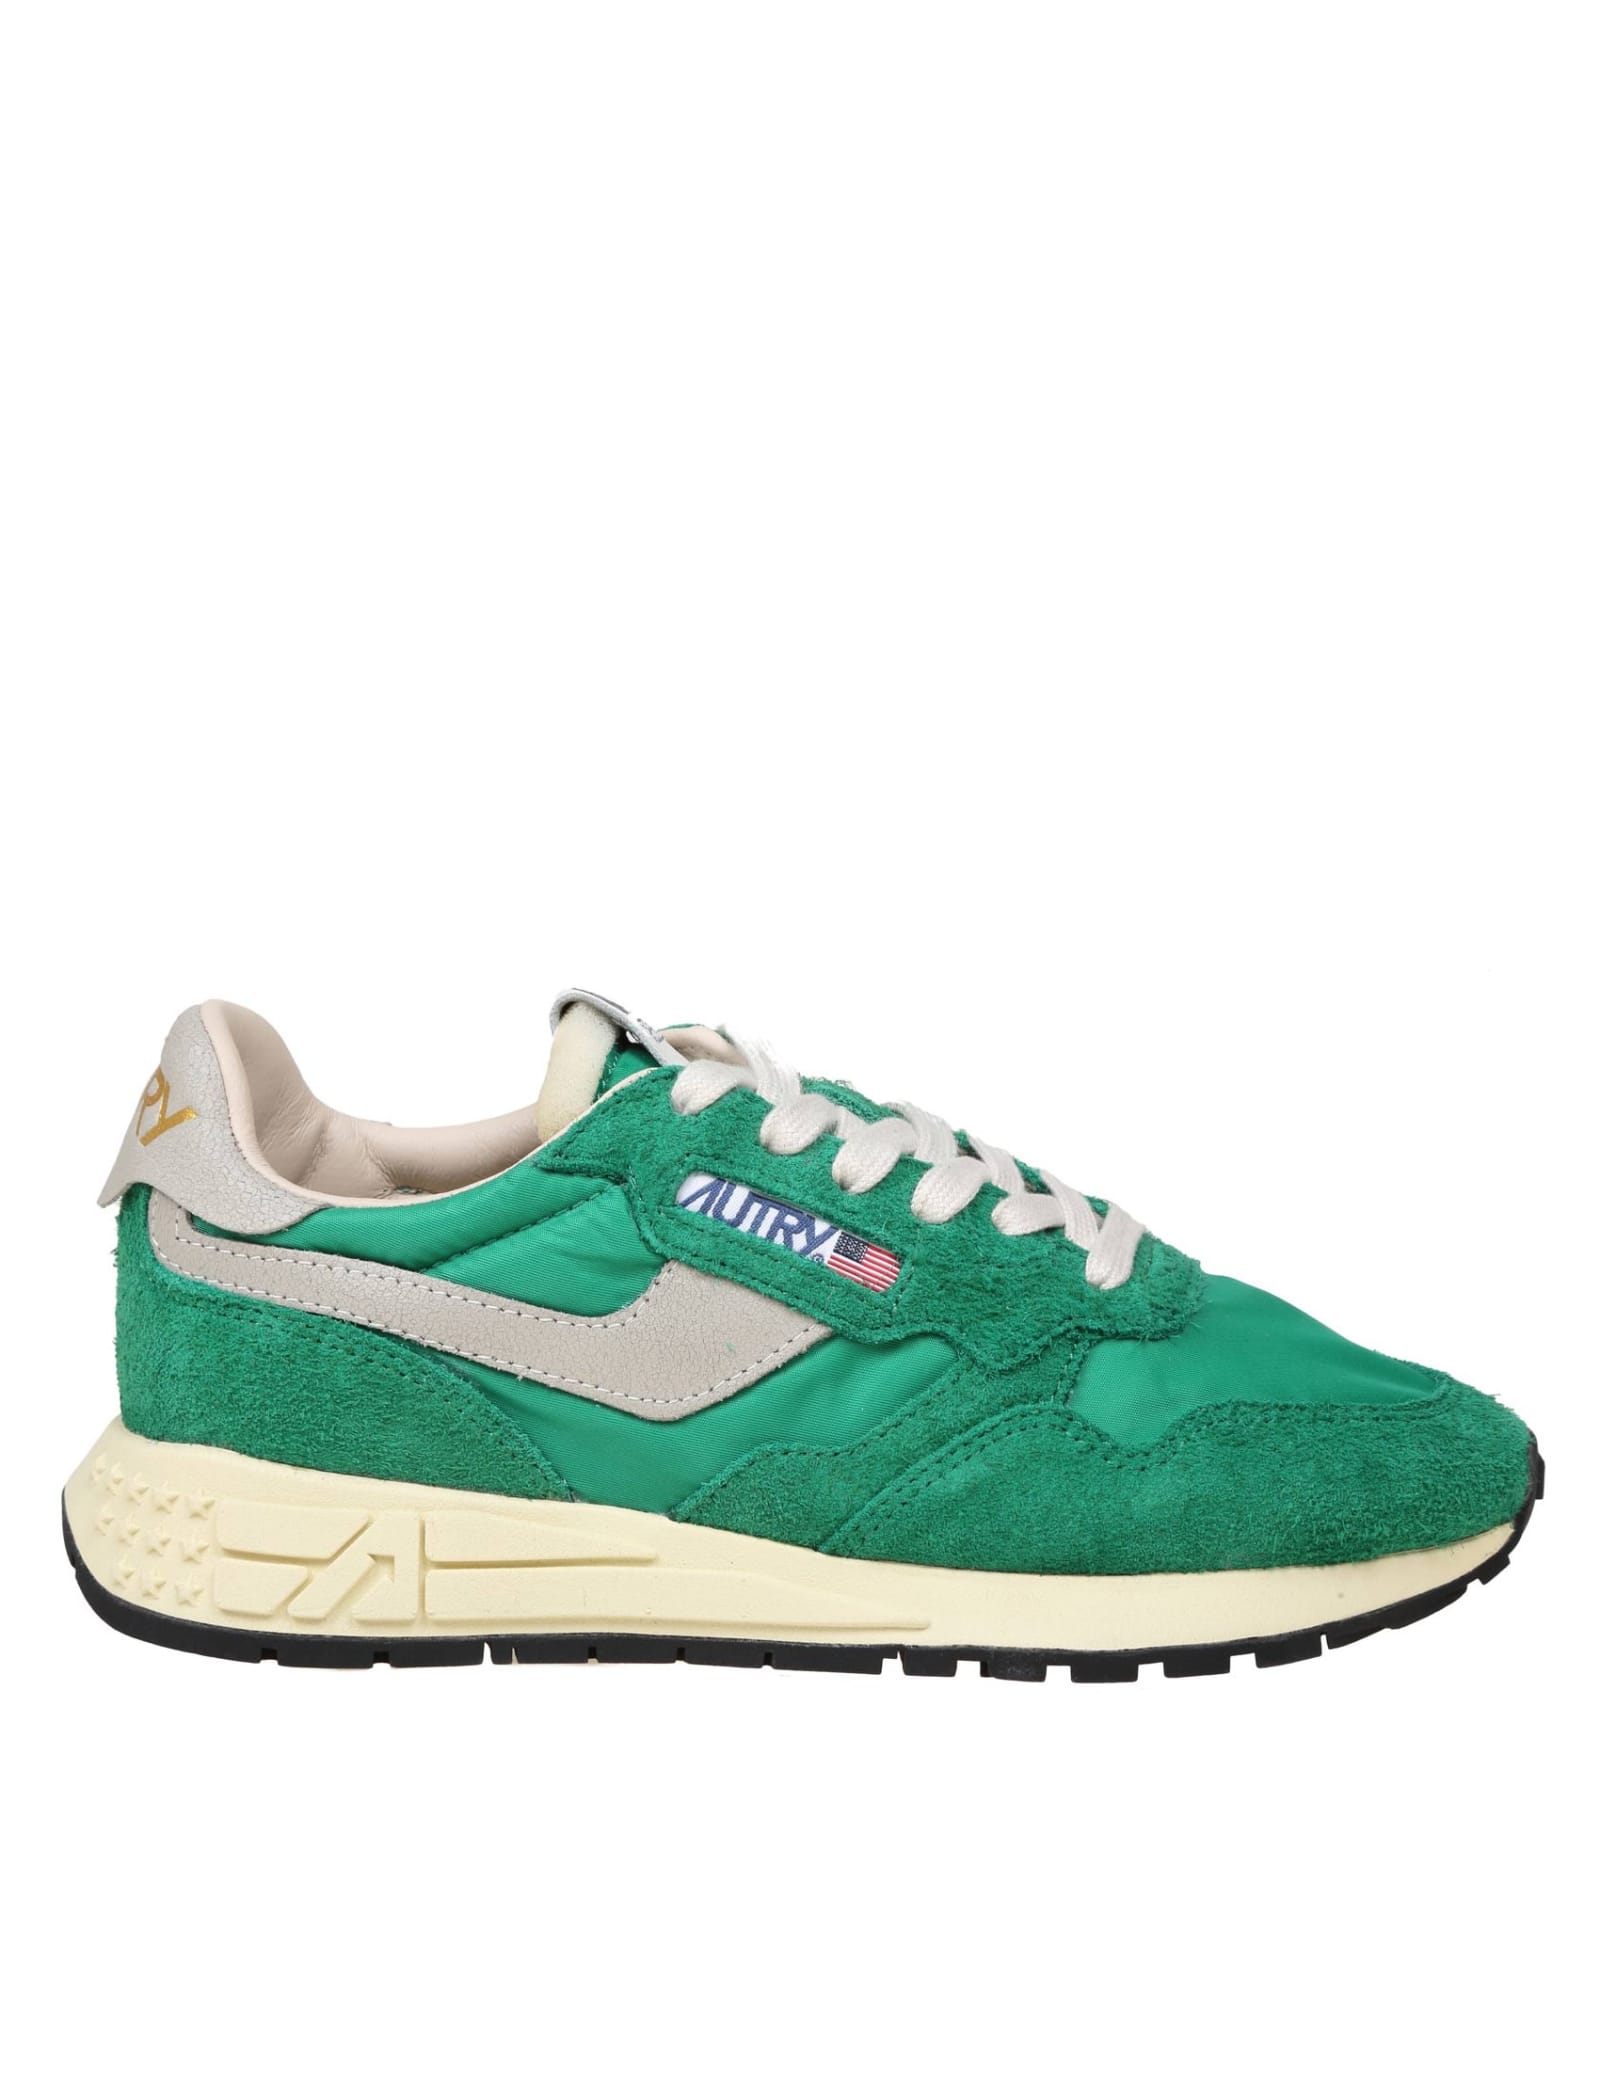 Shop Autry Reelwind Low Sneakers In Suede And Nylon Color Green